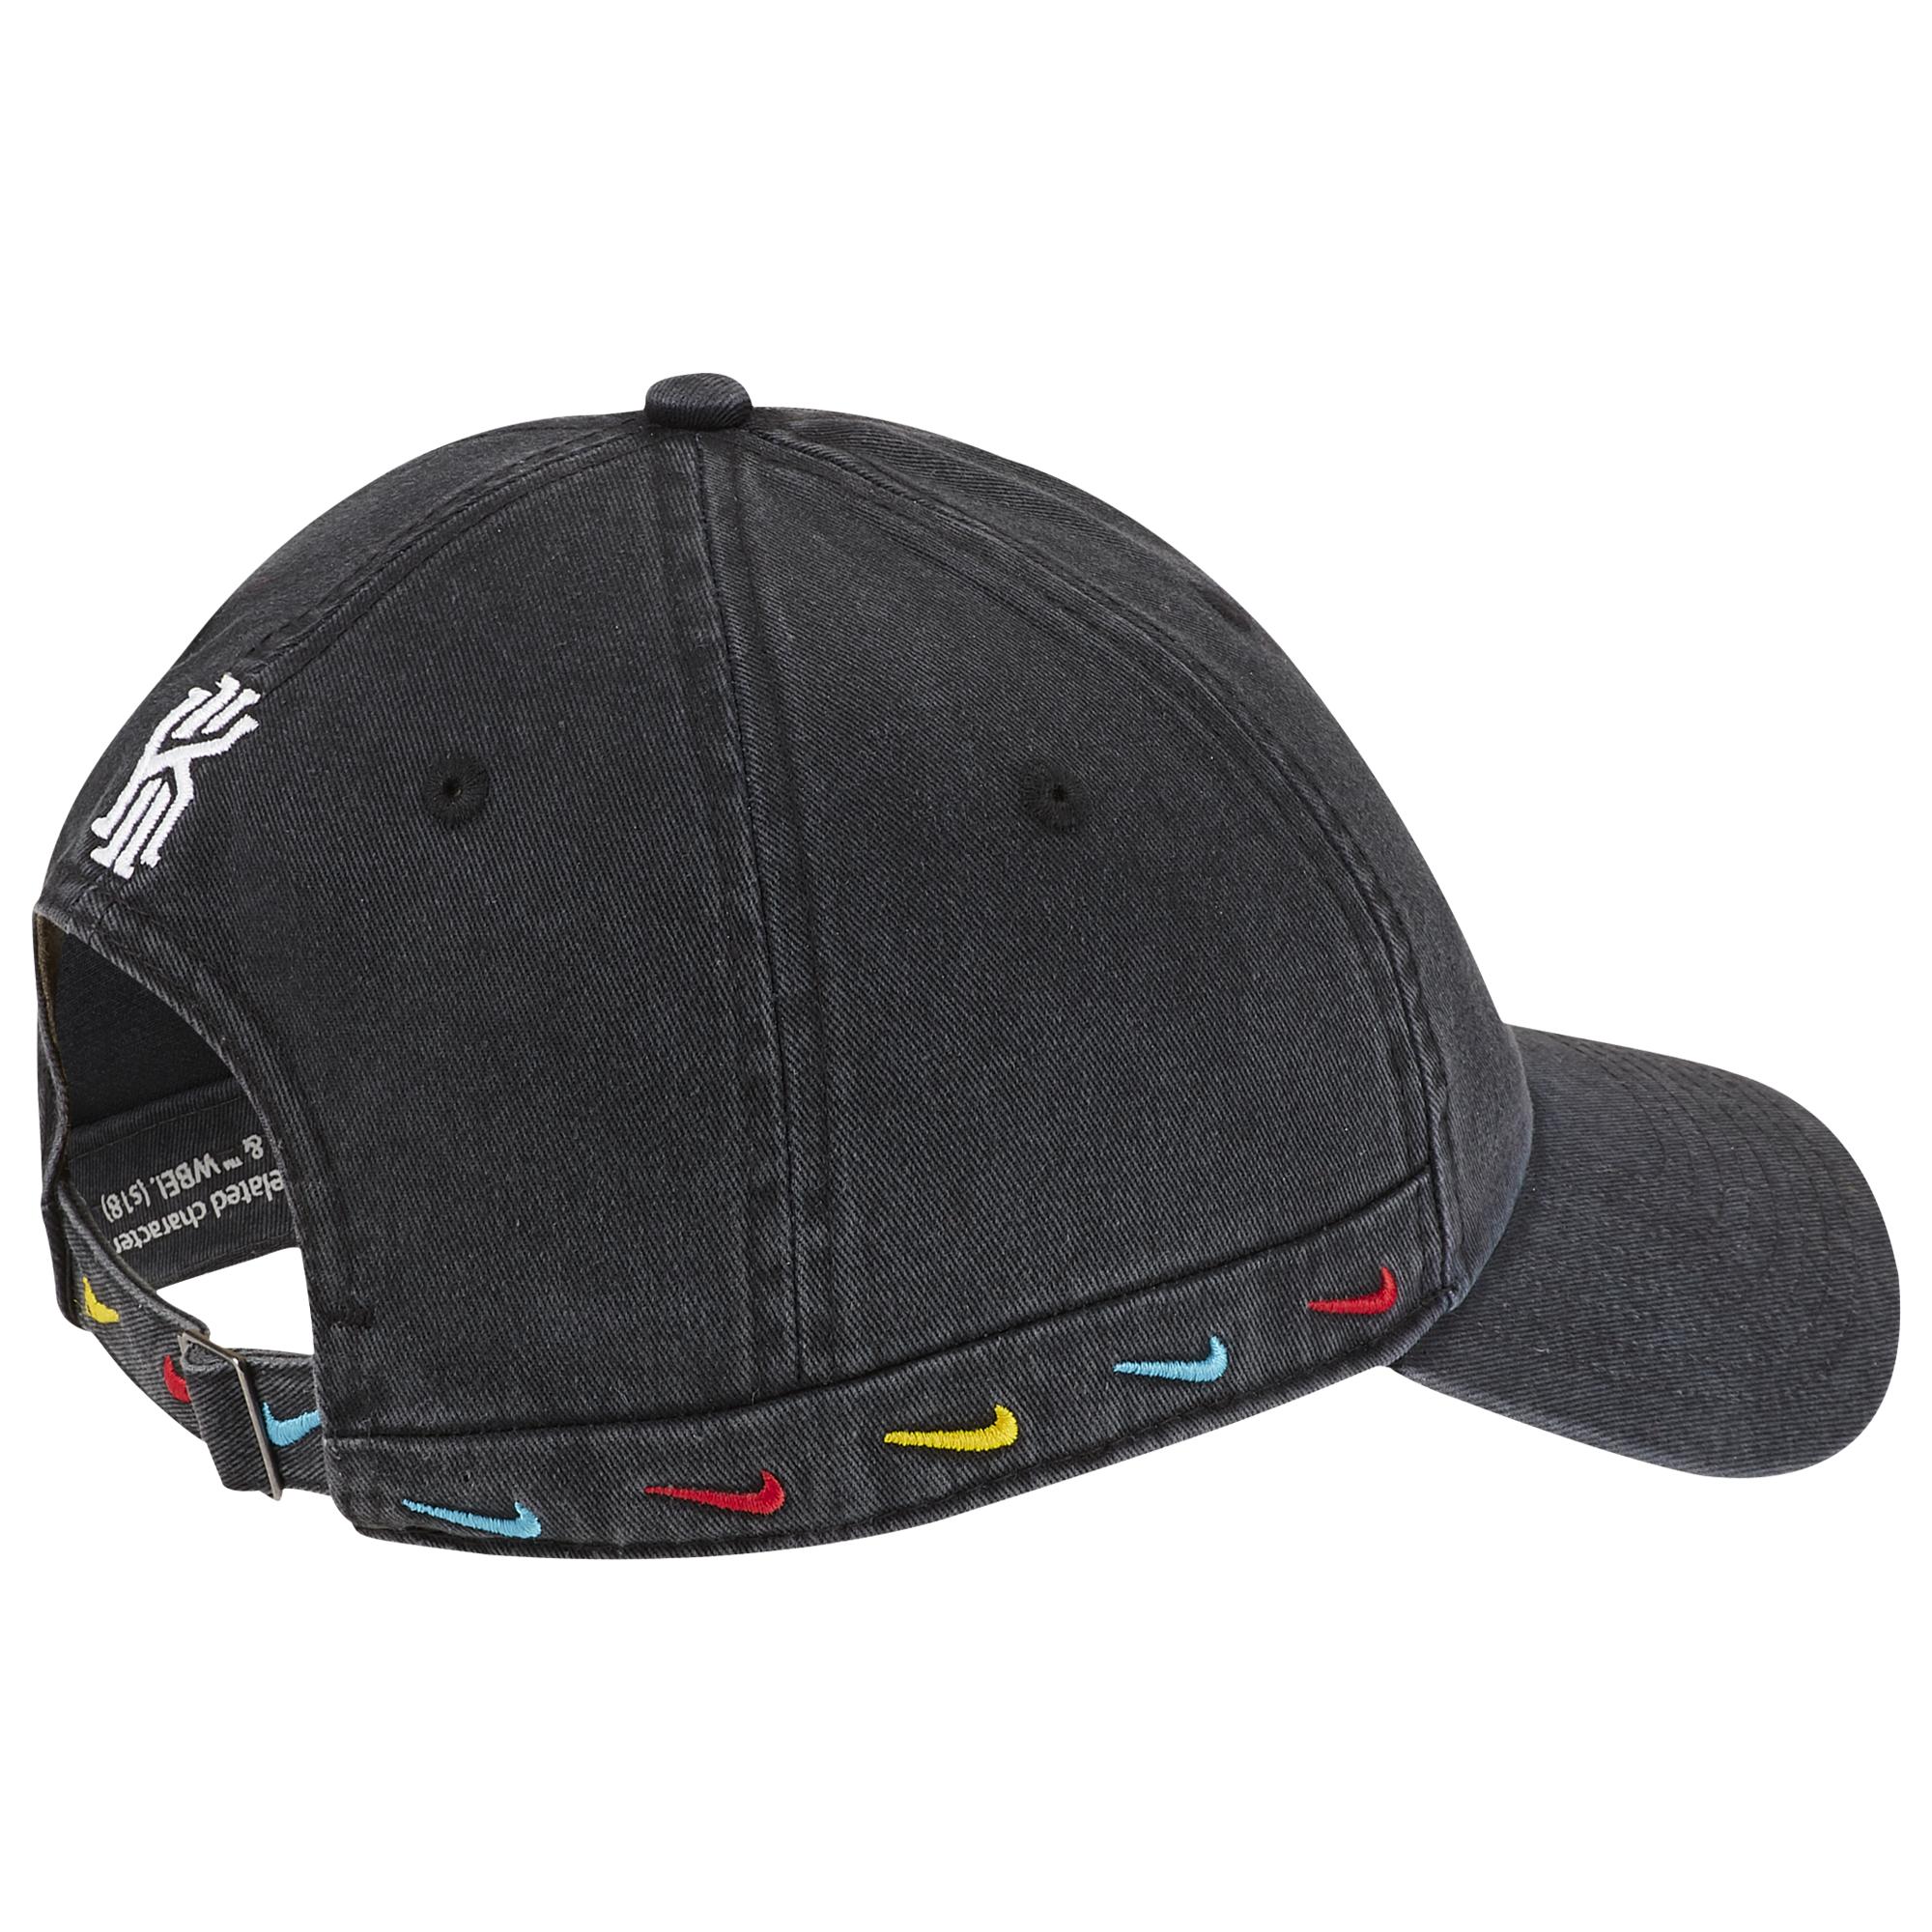 Nike Cotton Kyrie Irving Kyrie Friends H86 Cap in Black for Men - Lyst